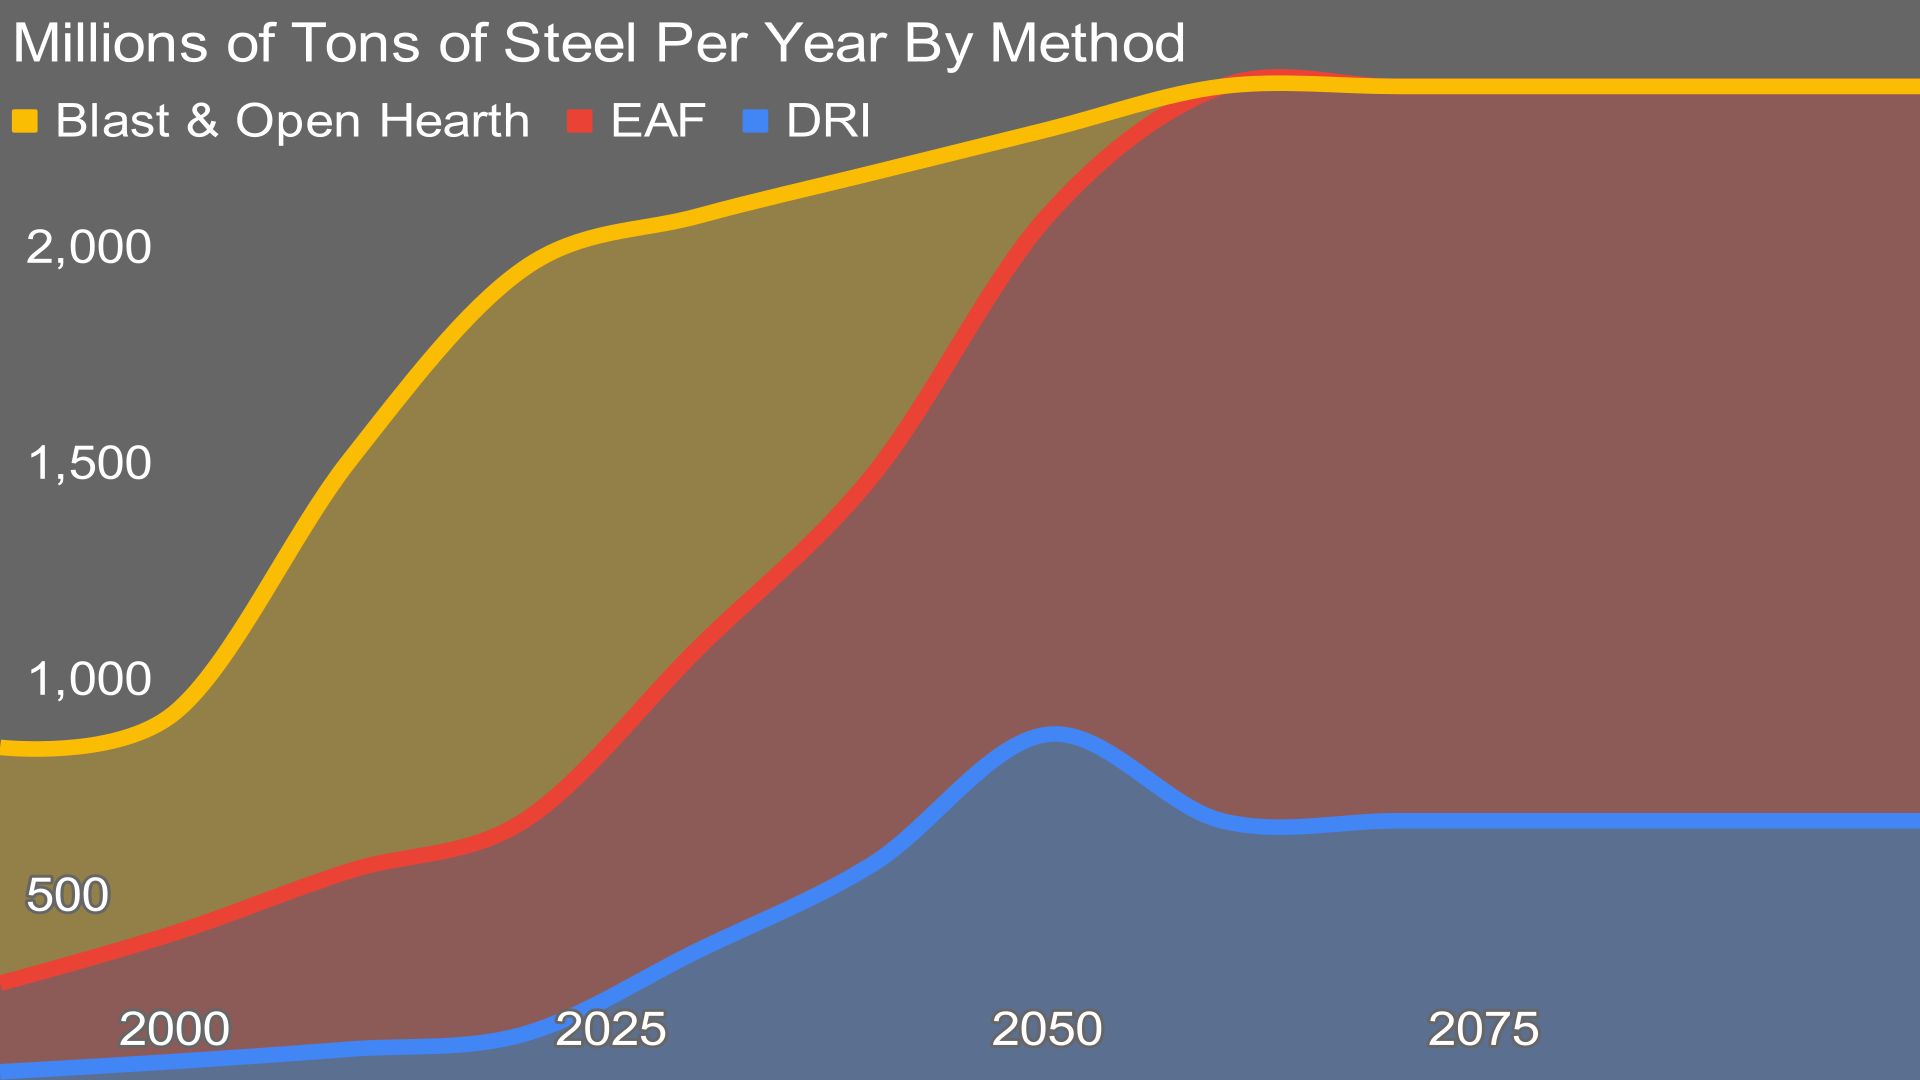 Millions of Tons of Steel Per Year By Method Through 2100